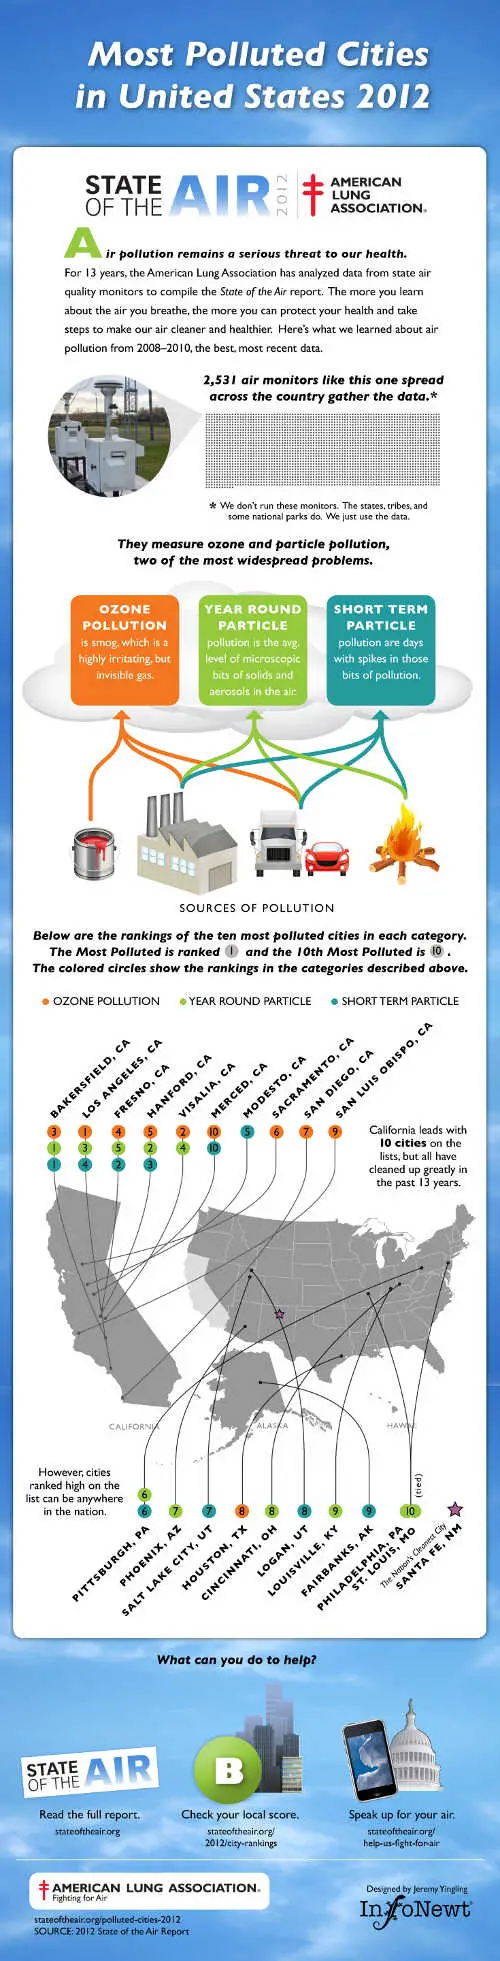 most-polluted-cities-2012-infographic